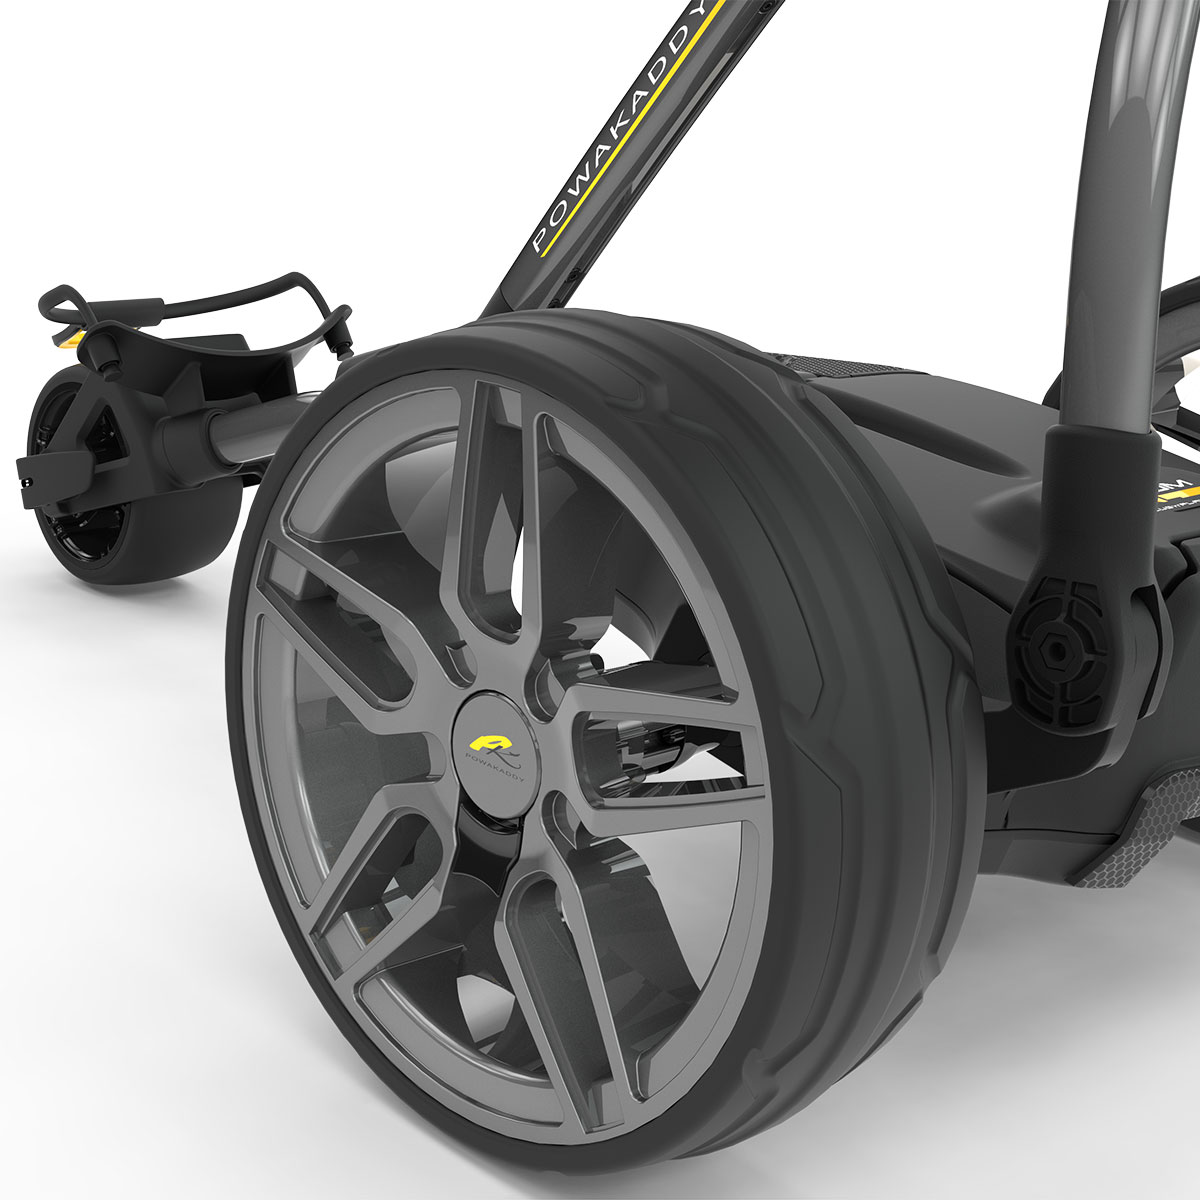 PowaKaddy Compact C2i 36 Hole Lithium Trolley 2019 from american golf